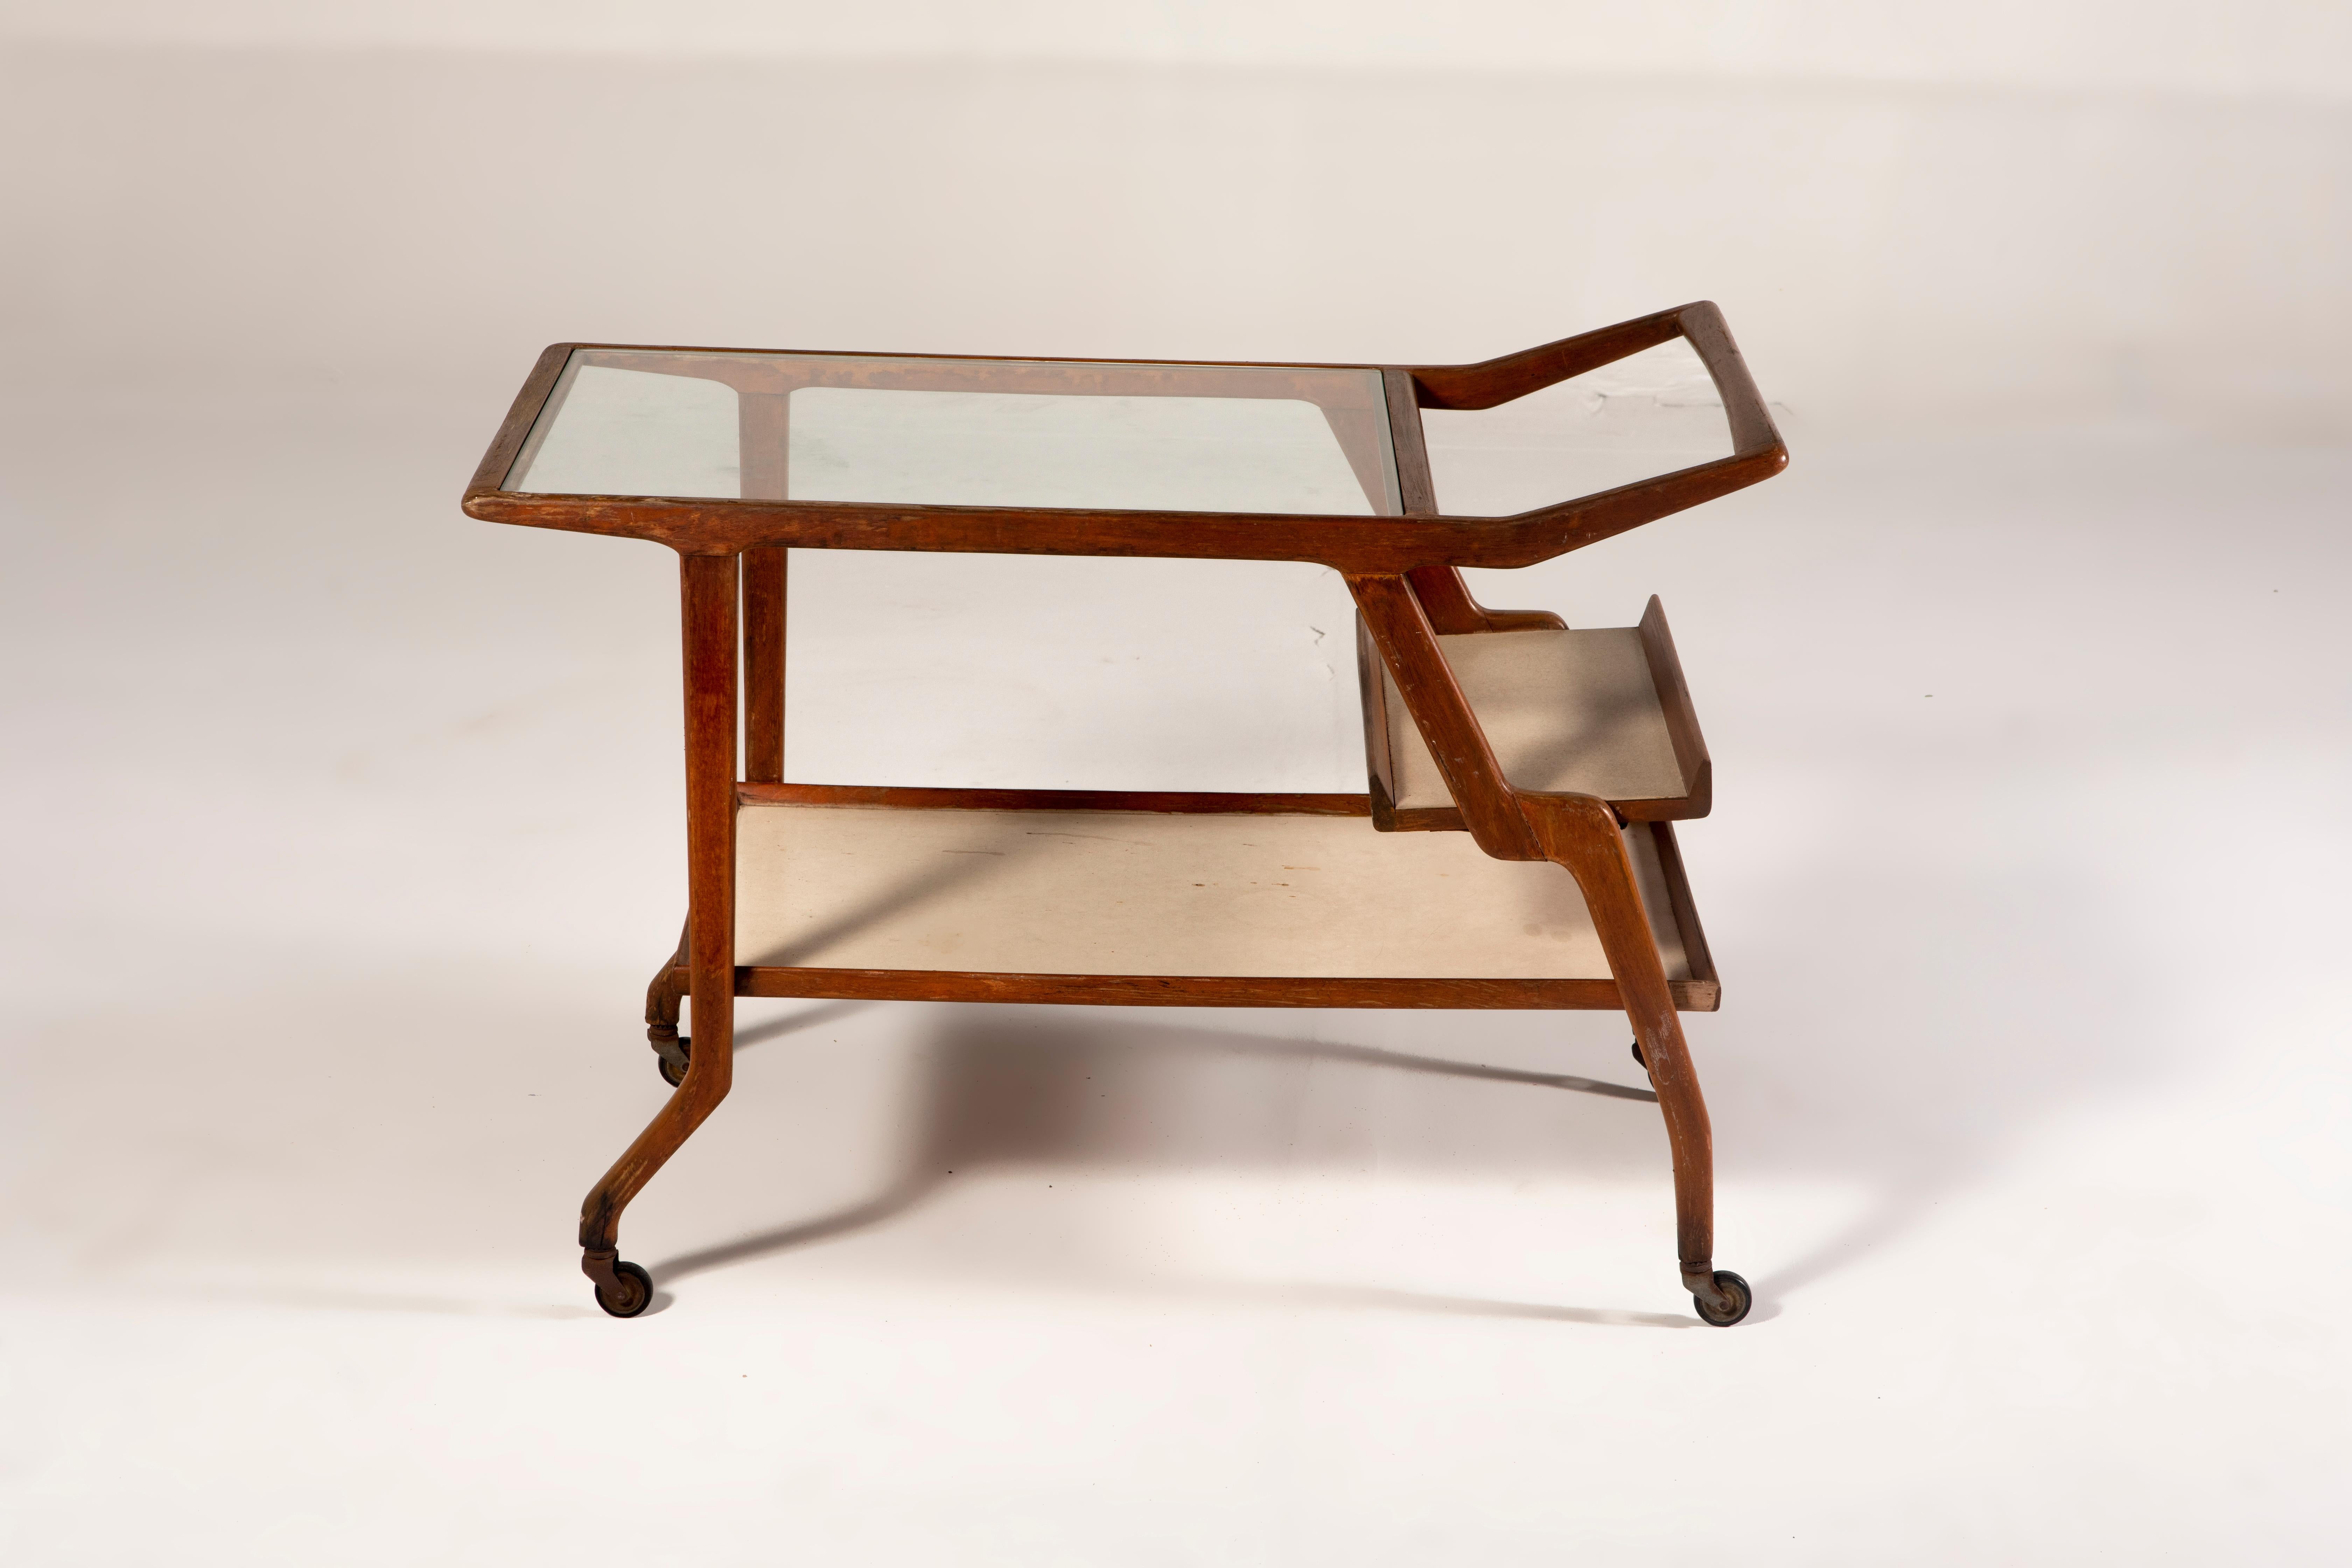 Mid-Century Modern Tea Cart by Brazilian Designer, 1960s

Mid-Century Brazilian Tea Cart by Unattributed Brazilian Designer, manufactured circa 1960.
The tea cart has 3 levels, the first with a formica top, and the last with a glass top, while the